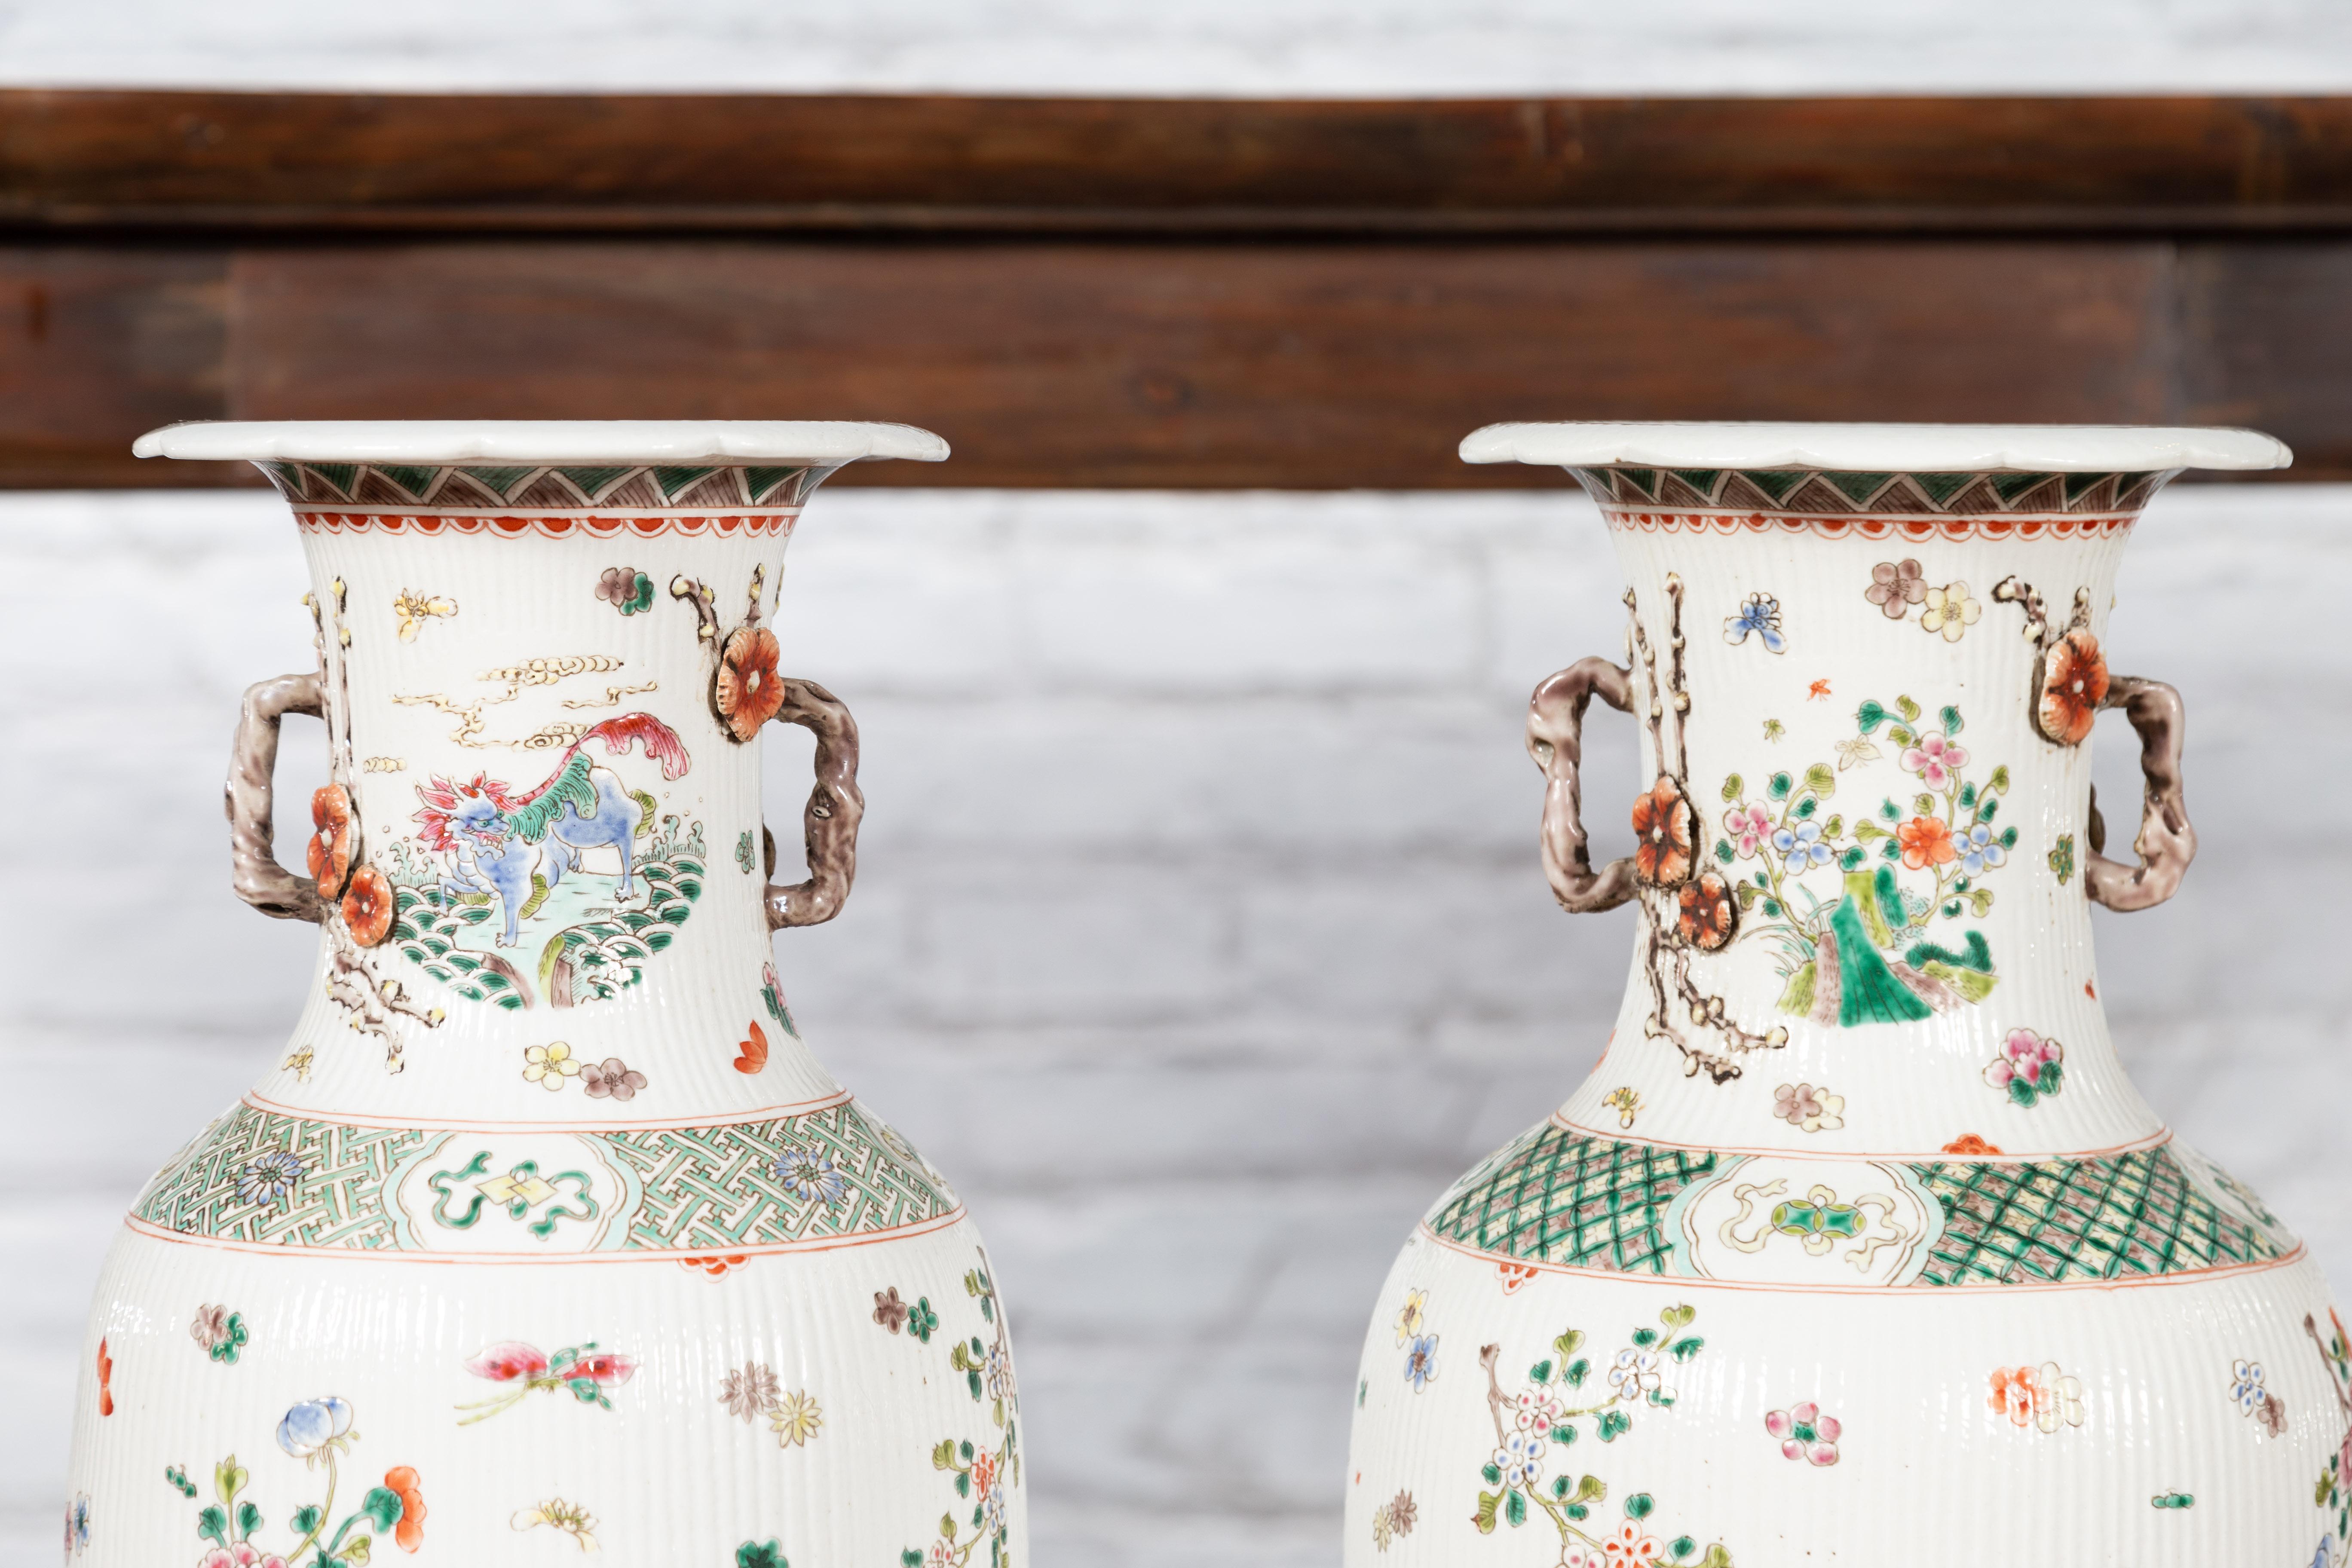 20th Century Antique Chinese Porcelain Vases with Hand-Painted Flowers and Mythical Animals